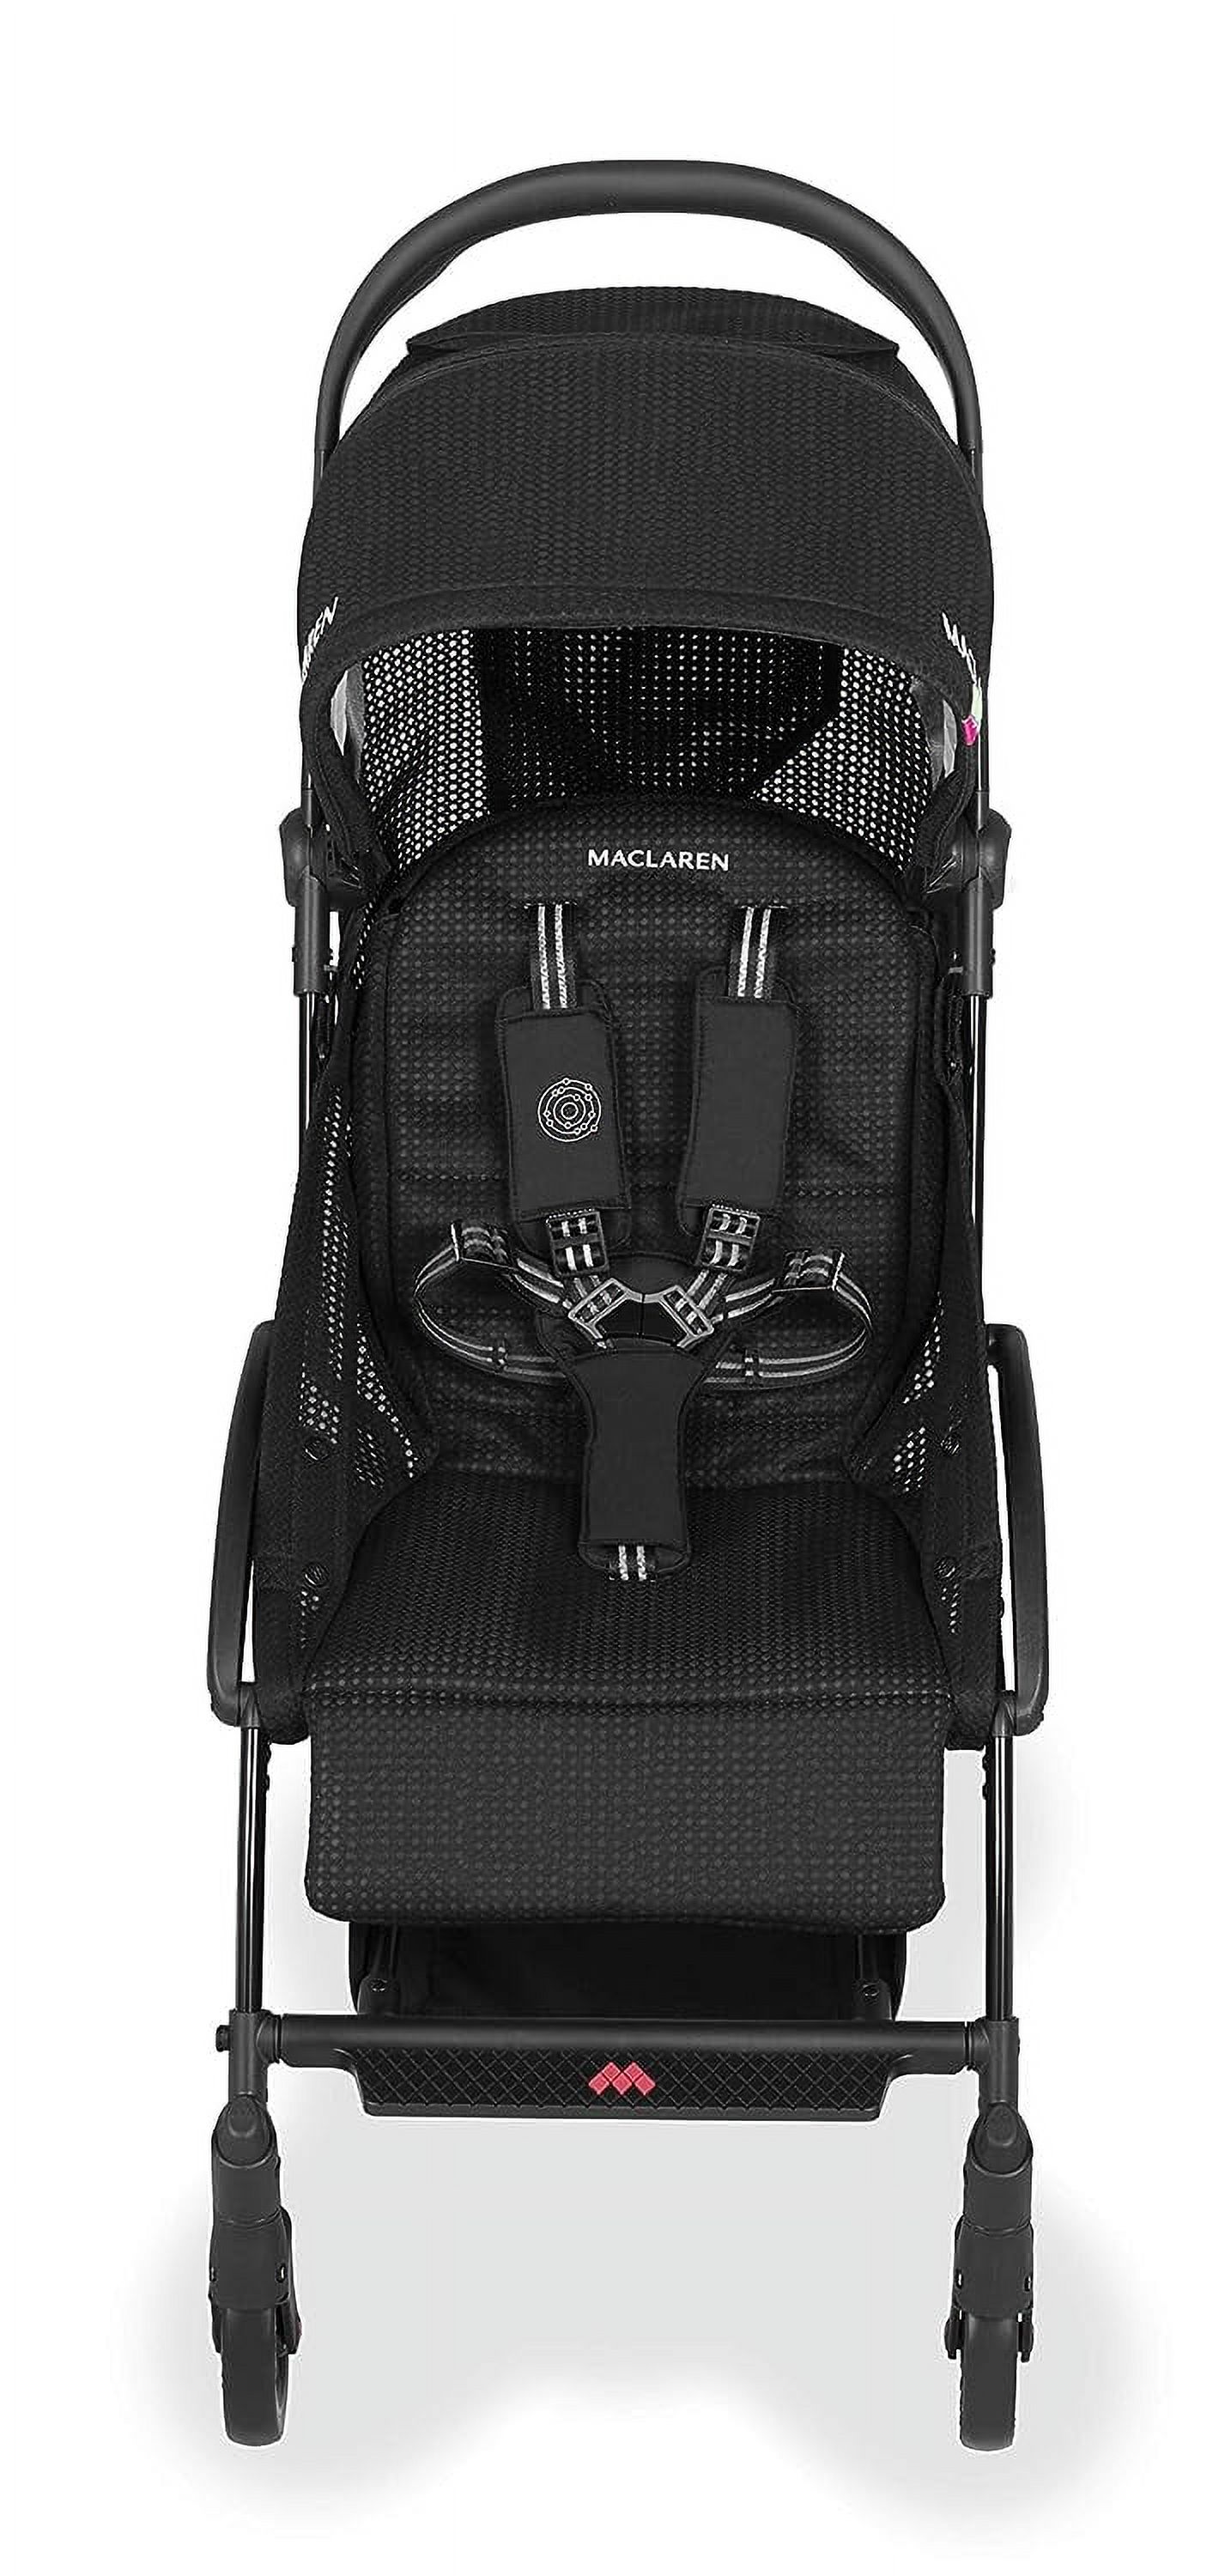 Maclaren Atom Style Set Travel System- Super Lightweight, Ultra-Compact Stroller, Fits On Airplane's Overhead Storage. Car Seat Compatible. Loaded with Accessories. Multi-Position Reclining Seat - image 2 of 6